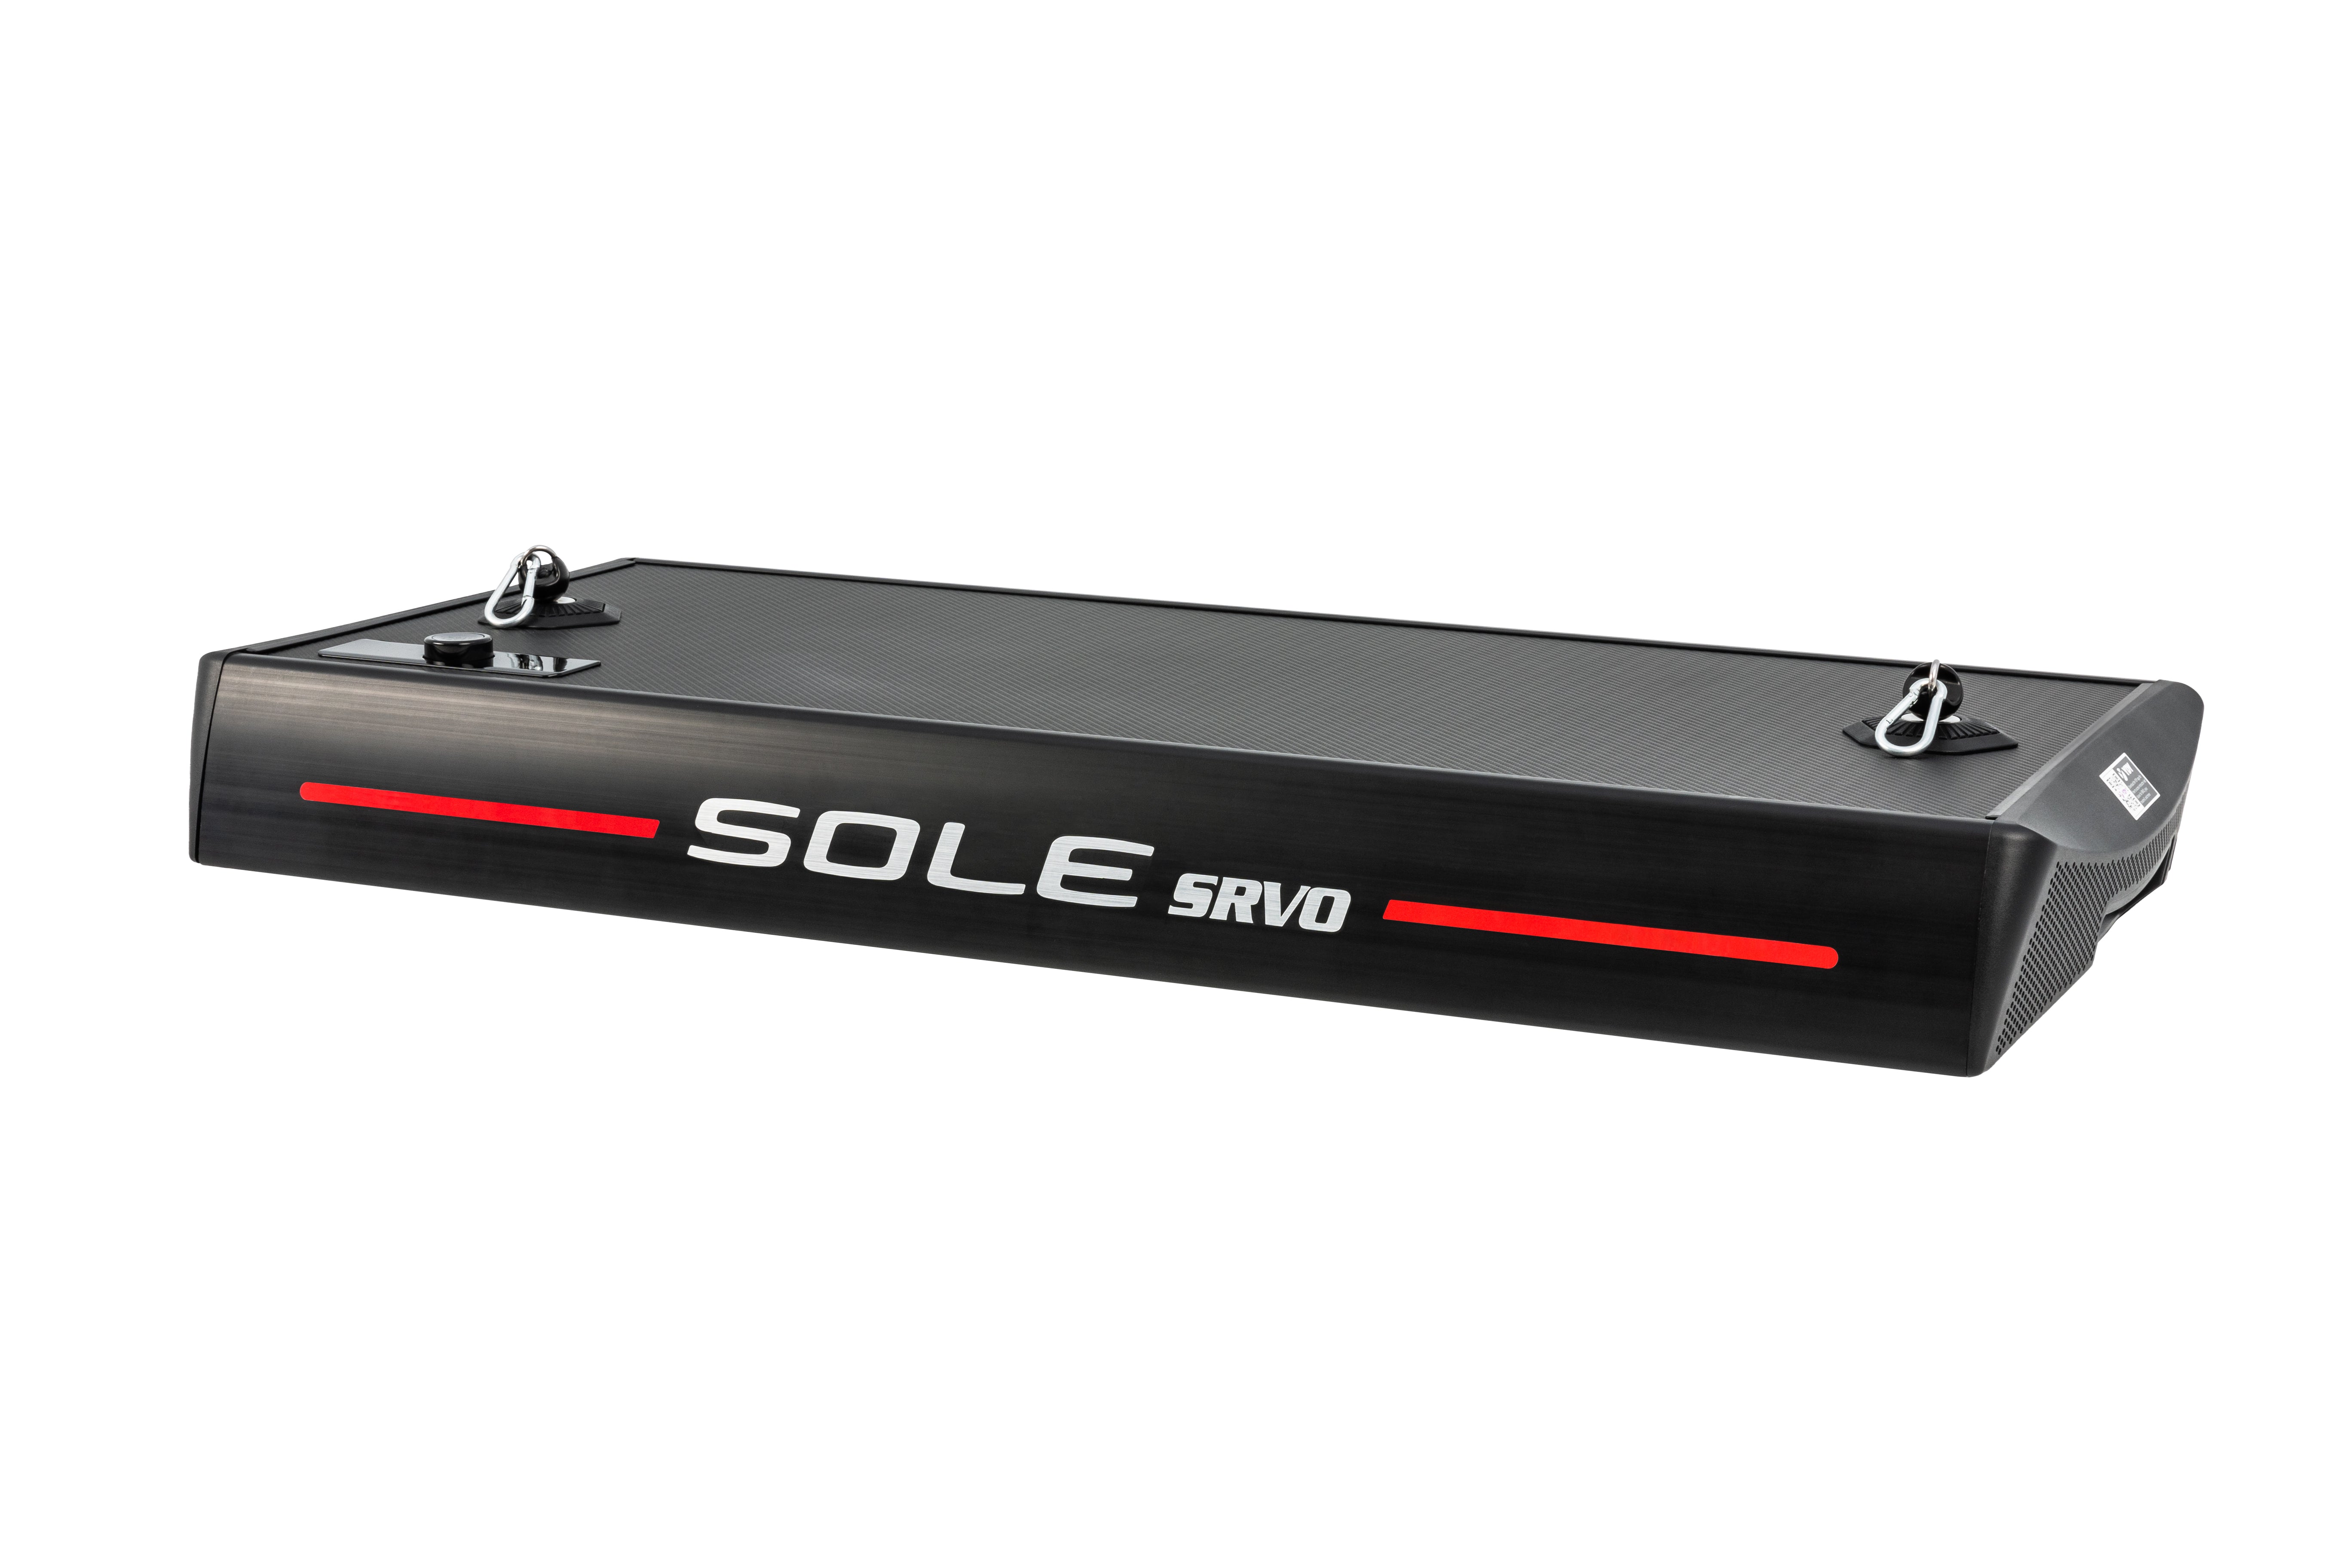 Side perspective of the Sole SRVO resistance platform, featuring a textured black surface, two metal anchor points, and a bold "SOLE SRVO" logo with red stripe detailing.